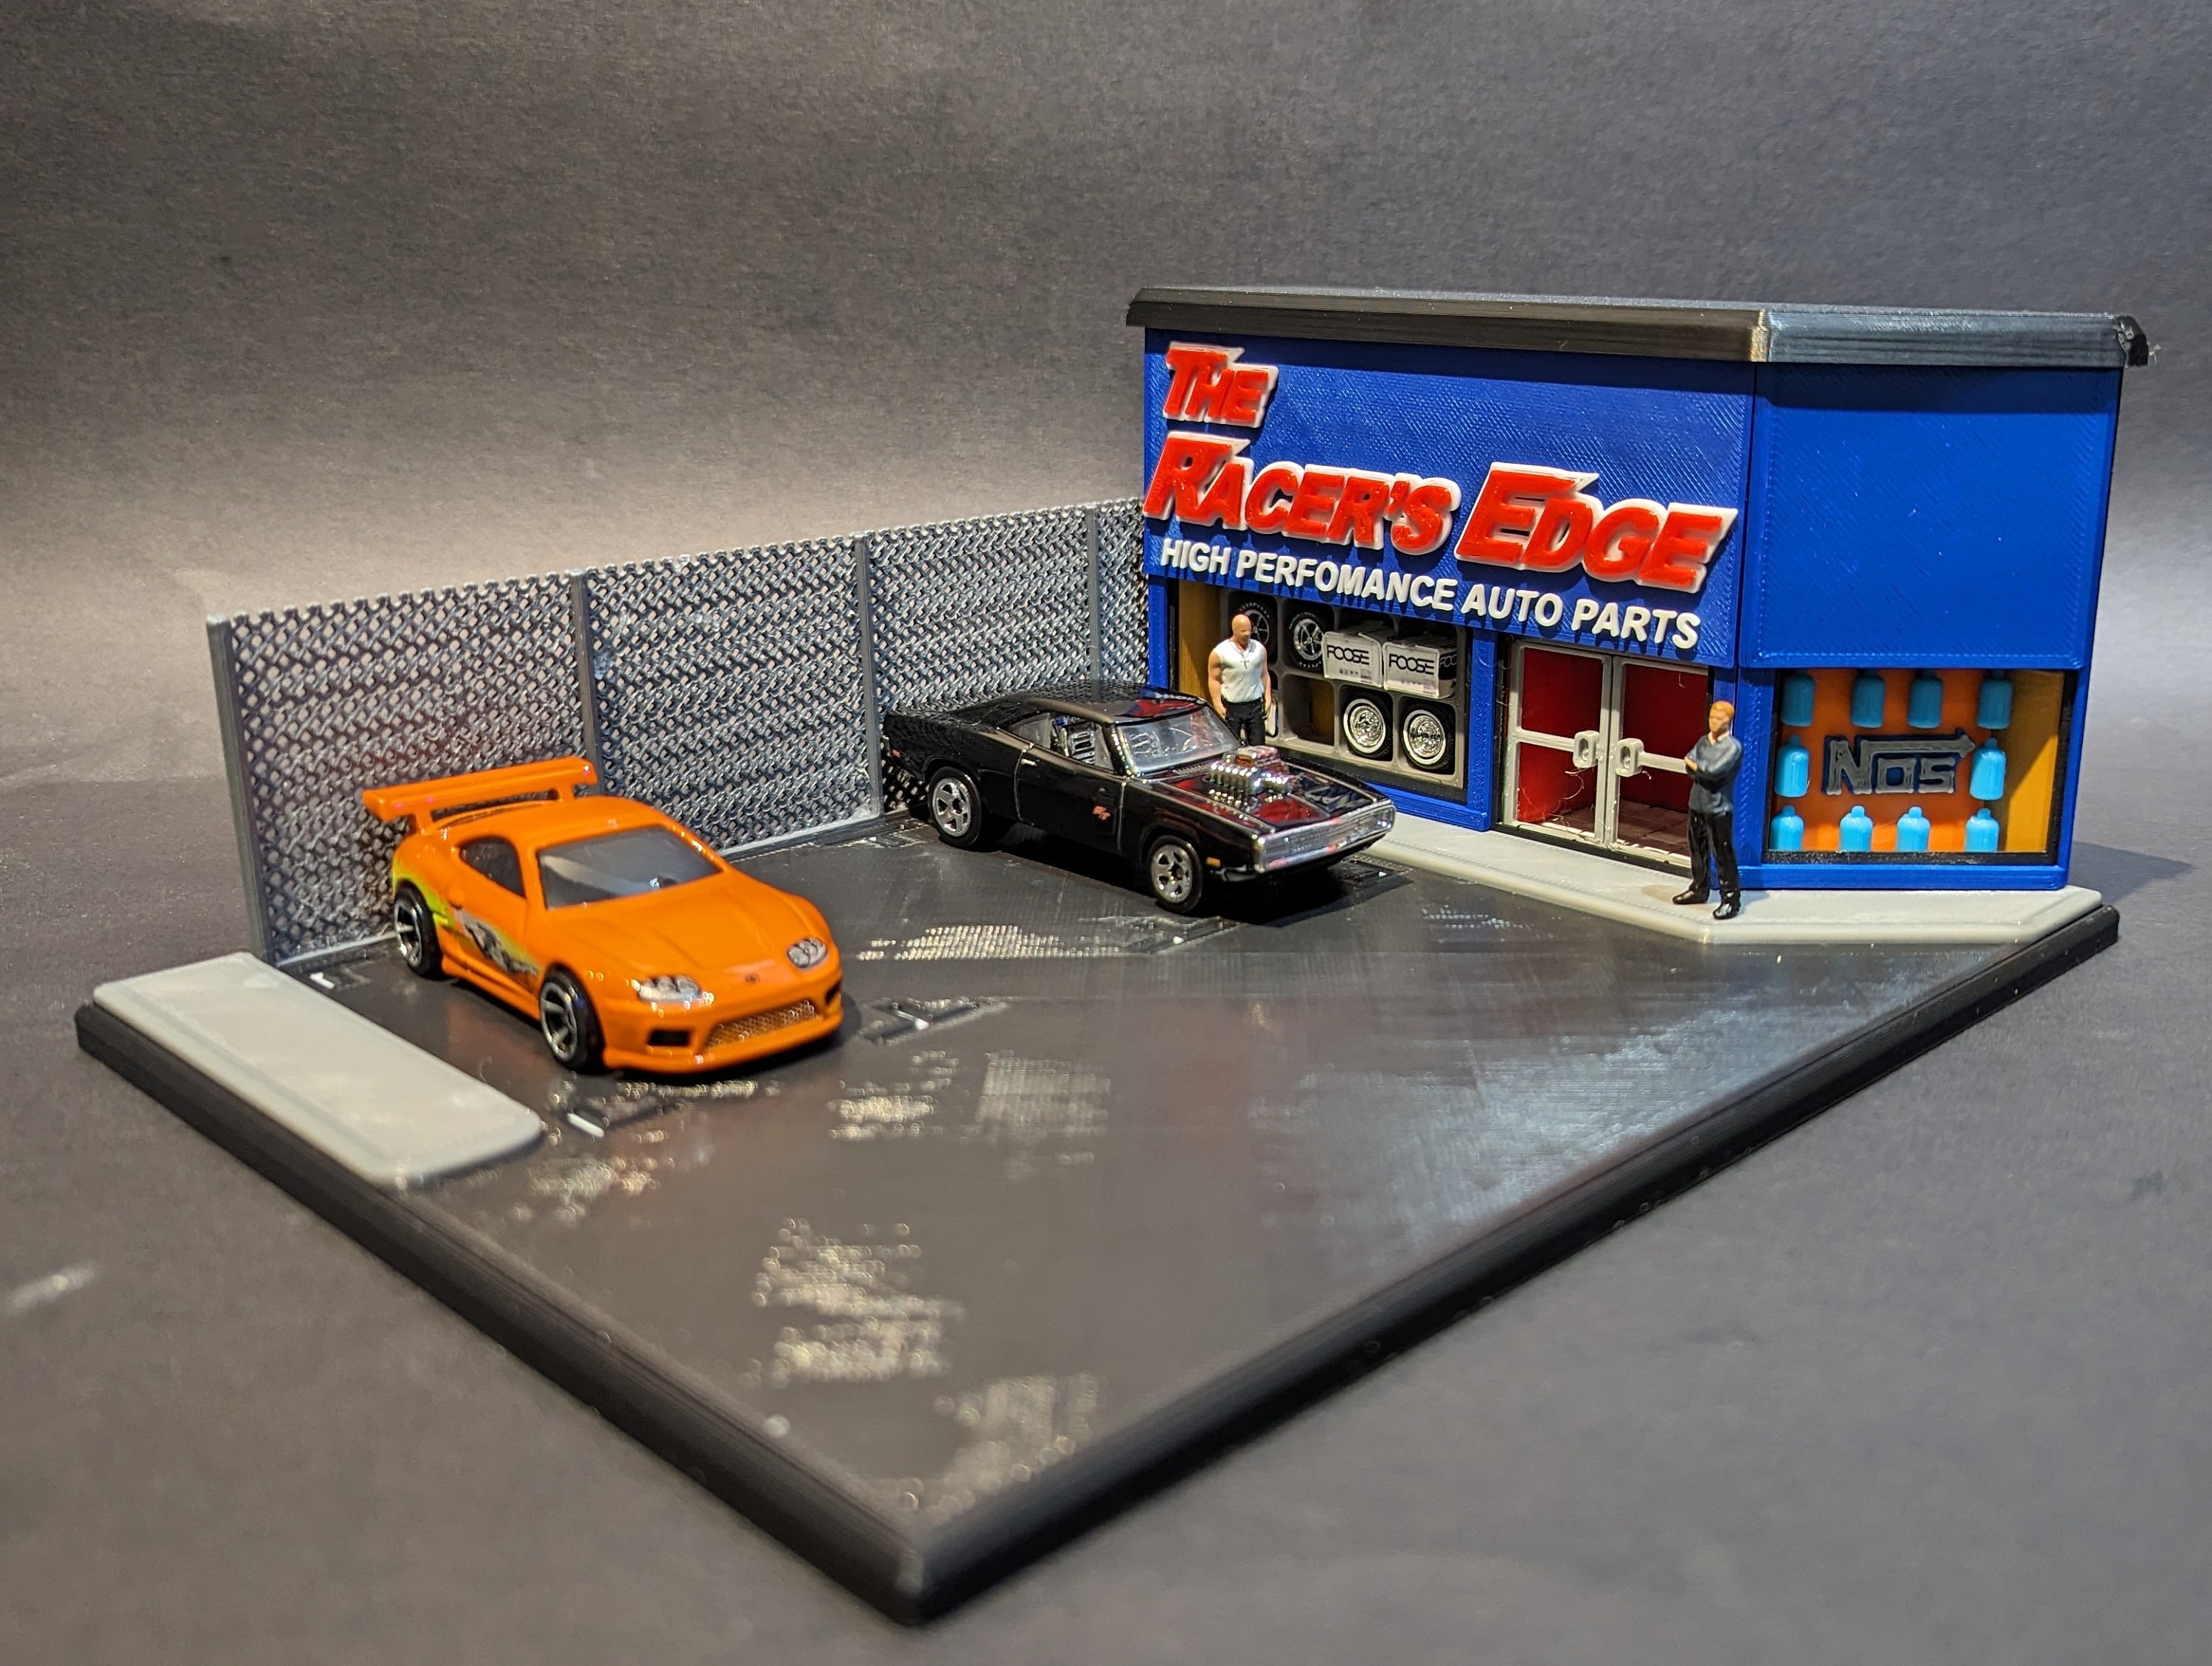 1:64 Scale Diorama Objects and 4 Pcs. Car Stacker Lifts for Sale